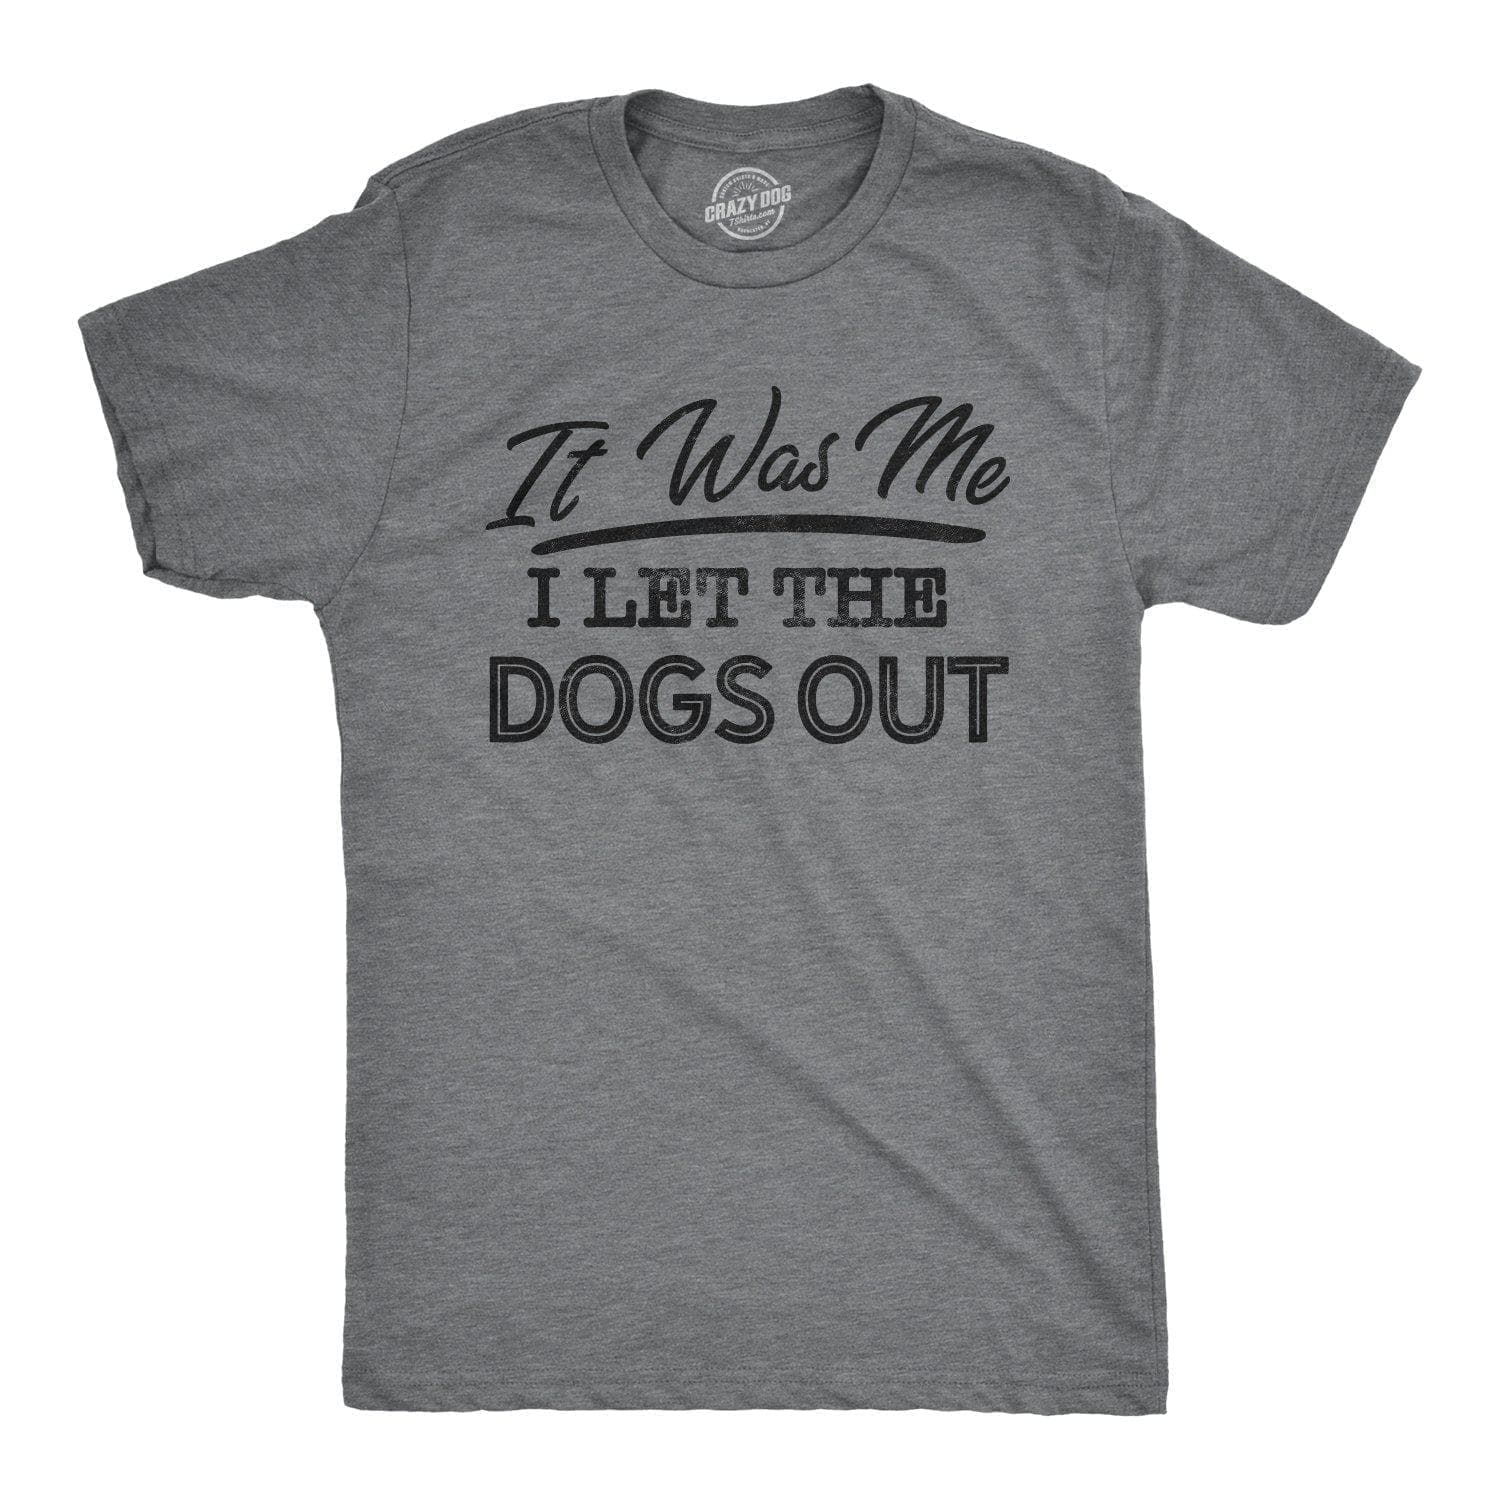 I Let The Dogs Out Men's Tshirt  -  Crazy Dog T-Shirts